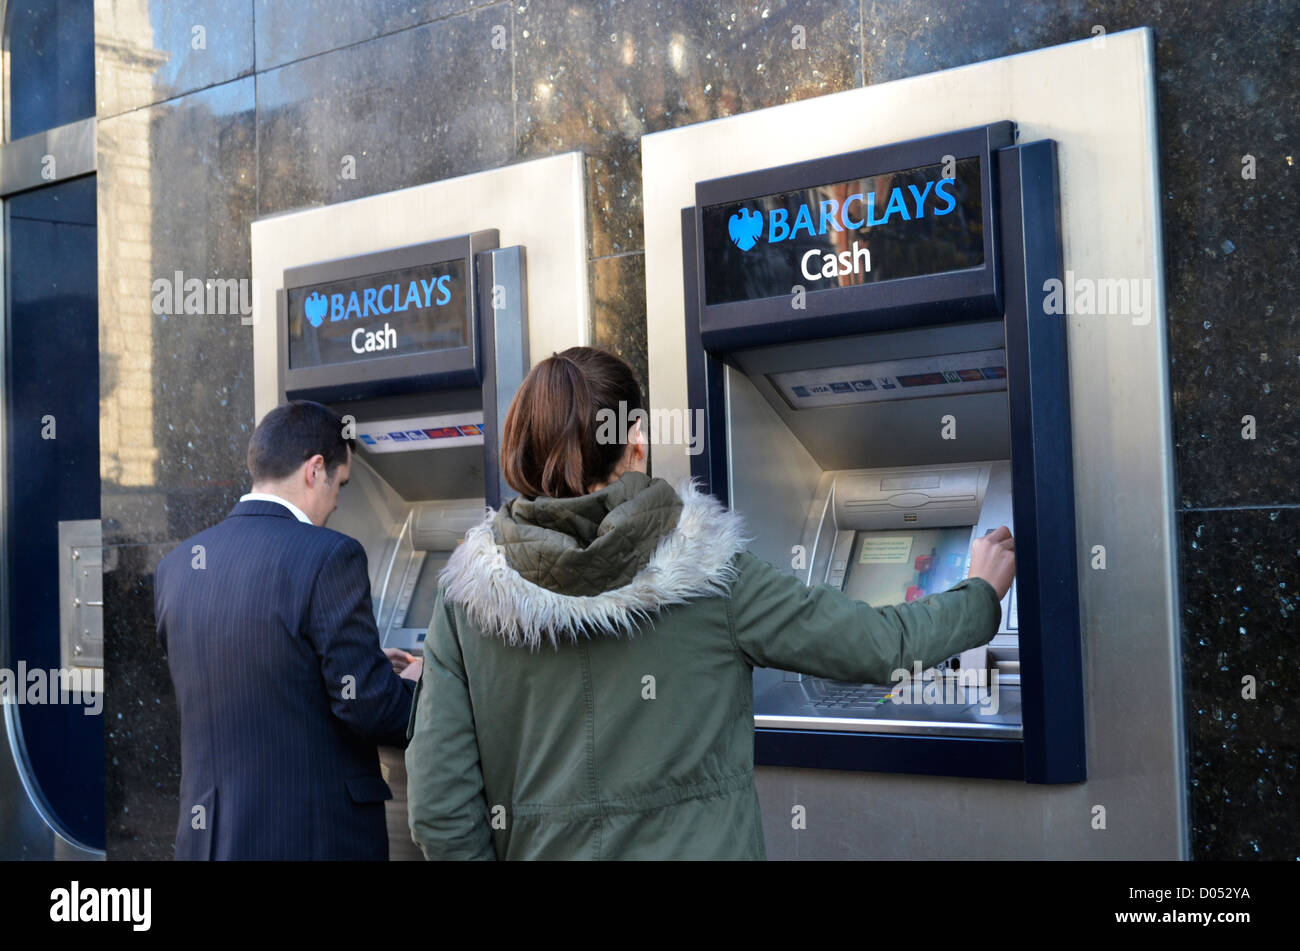 2 people at Barclays cash point London Stock Photo